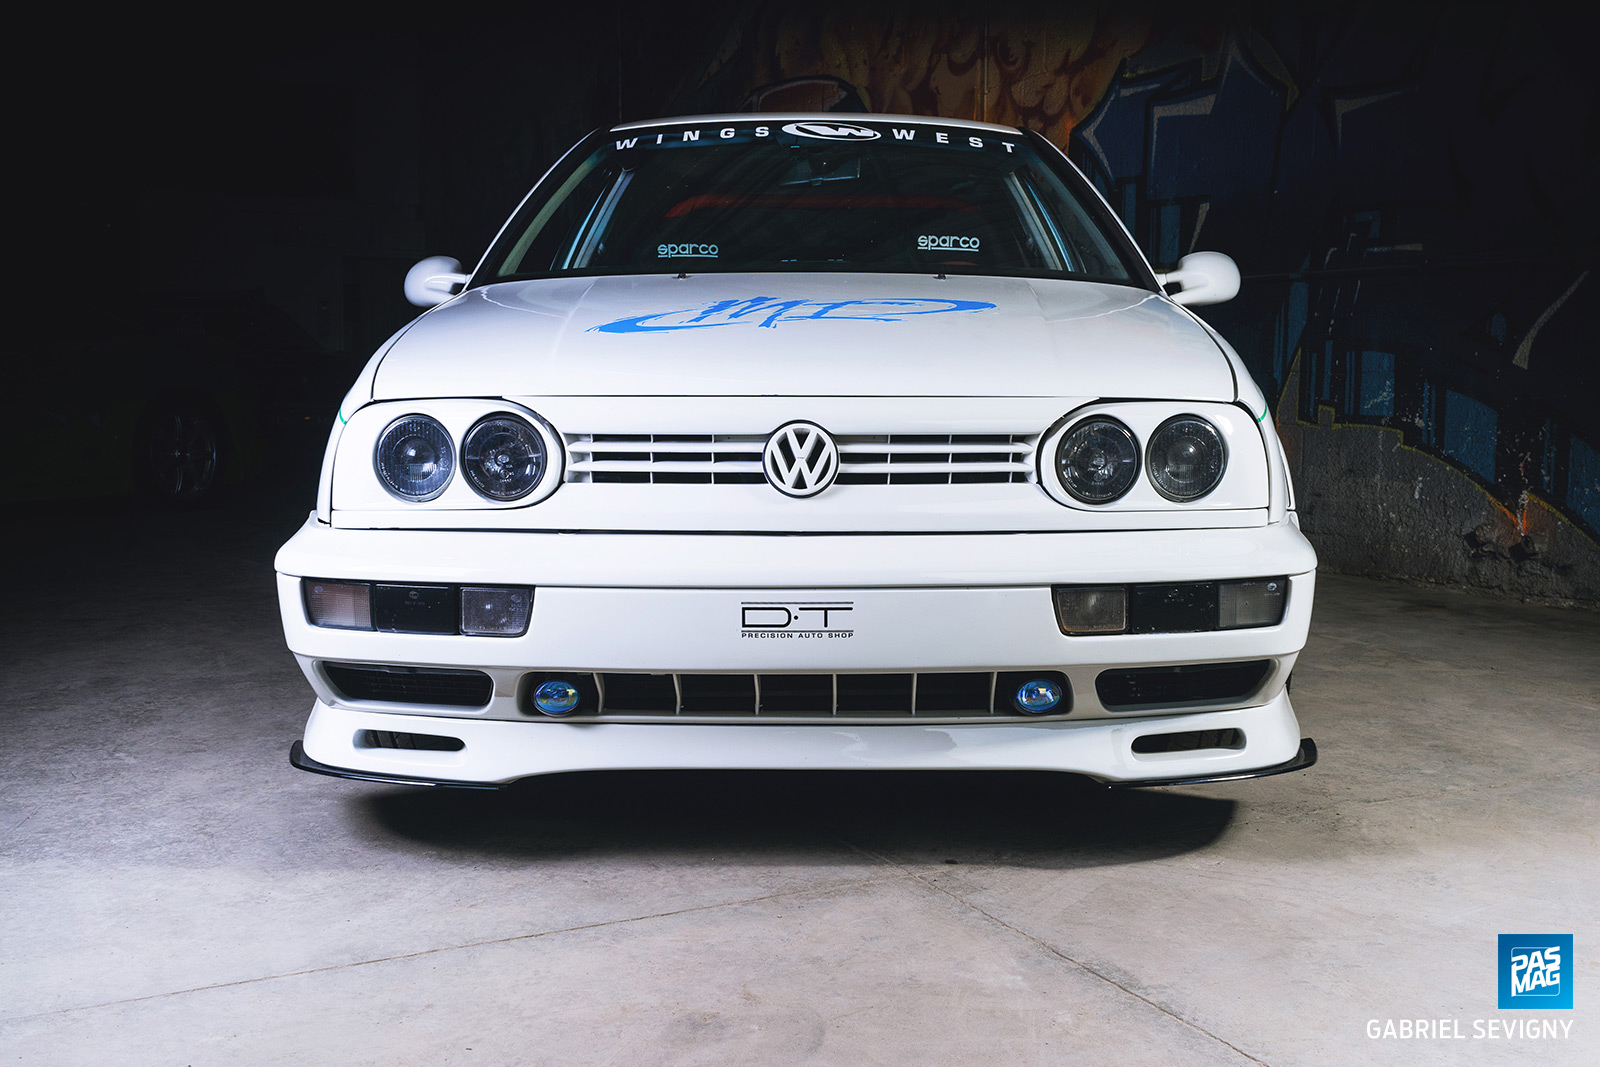 2018 PASMAG 150 Dominic Dubreuil 1996 VW Jetta Fast and Furious 08